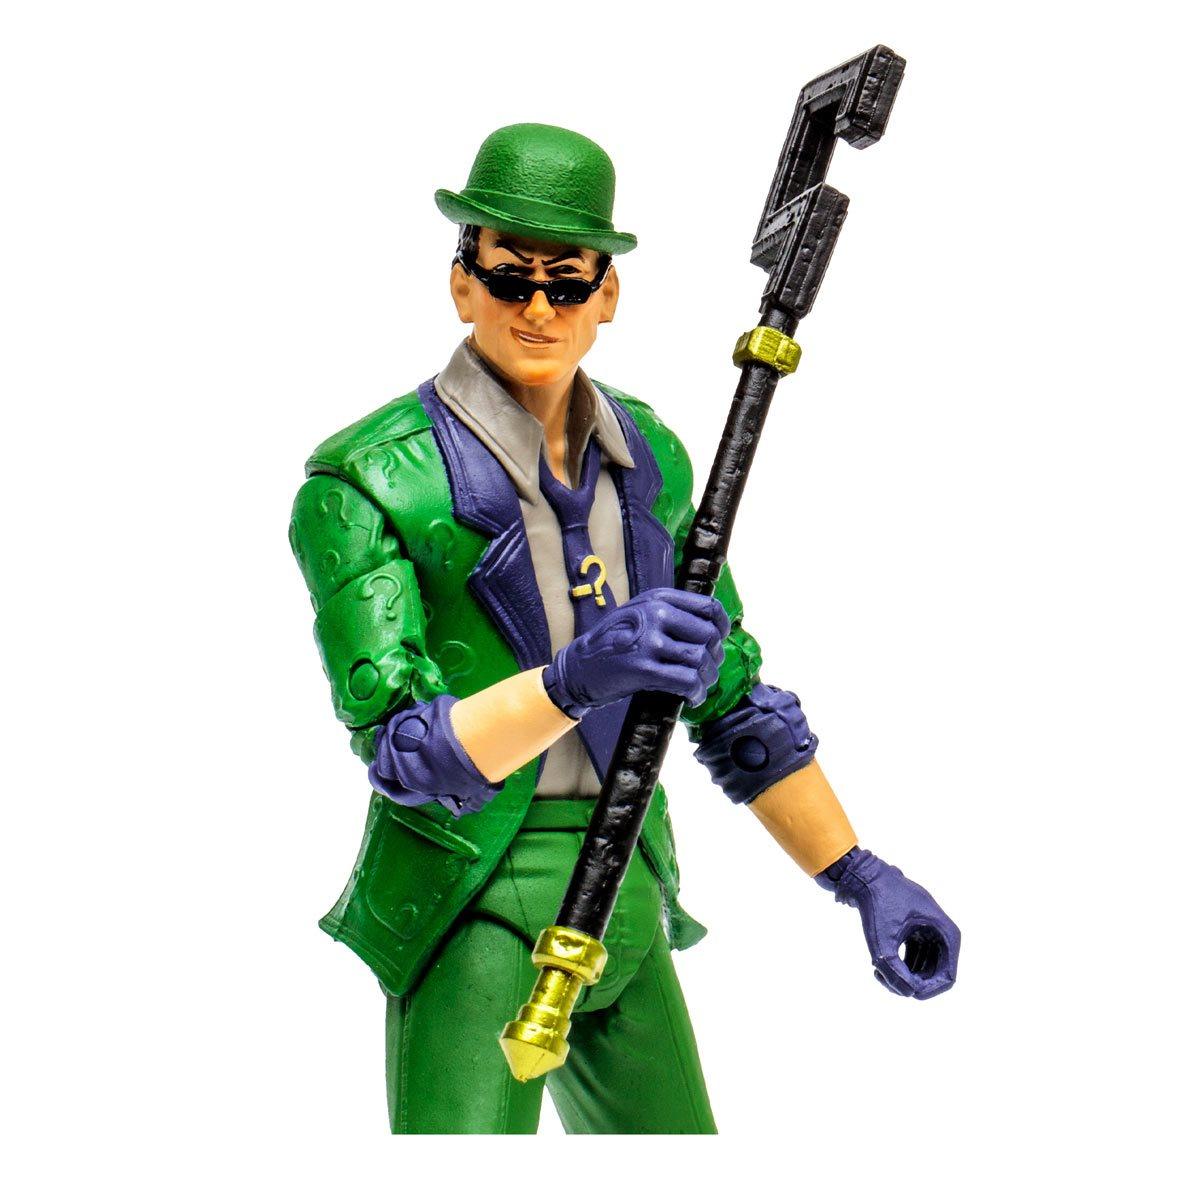 McFarlane Toys DC Gaming Wave 9 The Riddler Arkham City 7-Inch Scale Action Figure - BumbleToys - 18+, 6+ Years, Action Figures, Boys, collectible, collectors, dup-review-publication, Figures, McFarlane Toys, OXE, Pre-Order